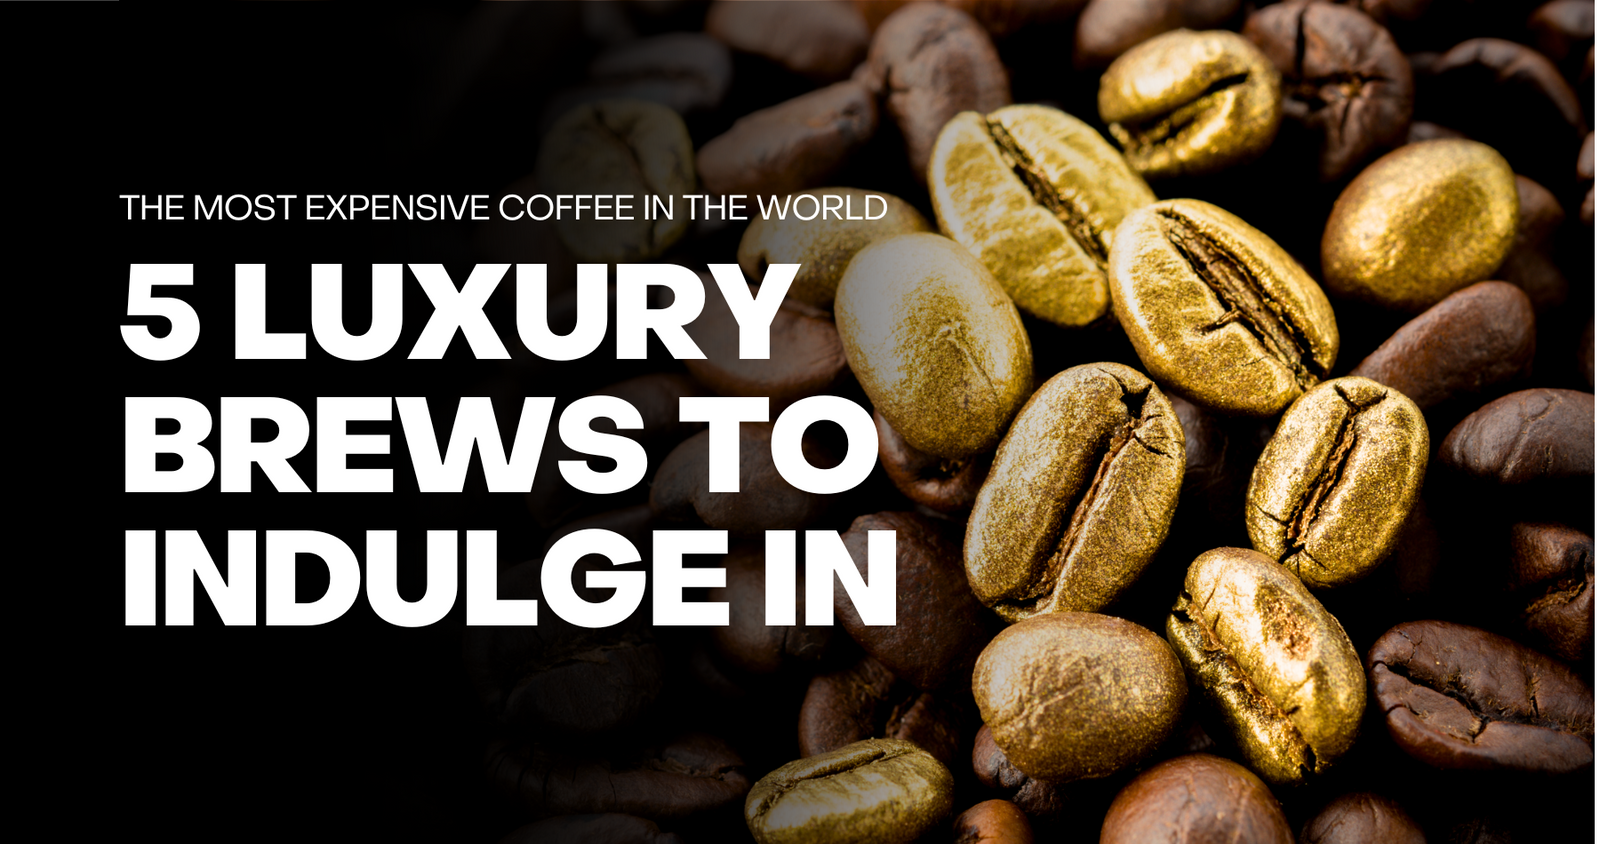 The Most Expensive Coffee in the World: 5 Luxury Brews to Indulge In